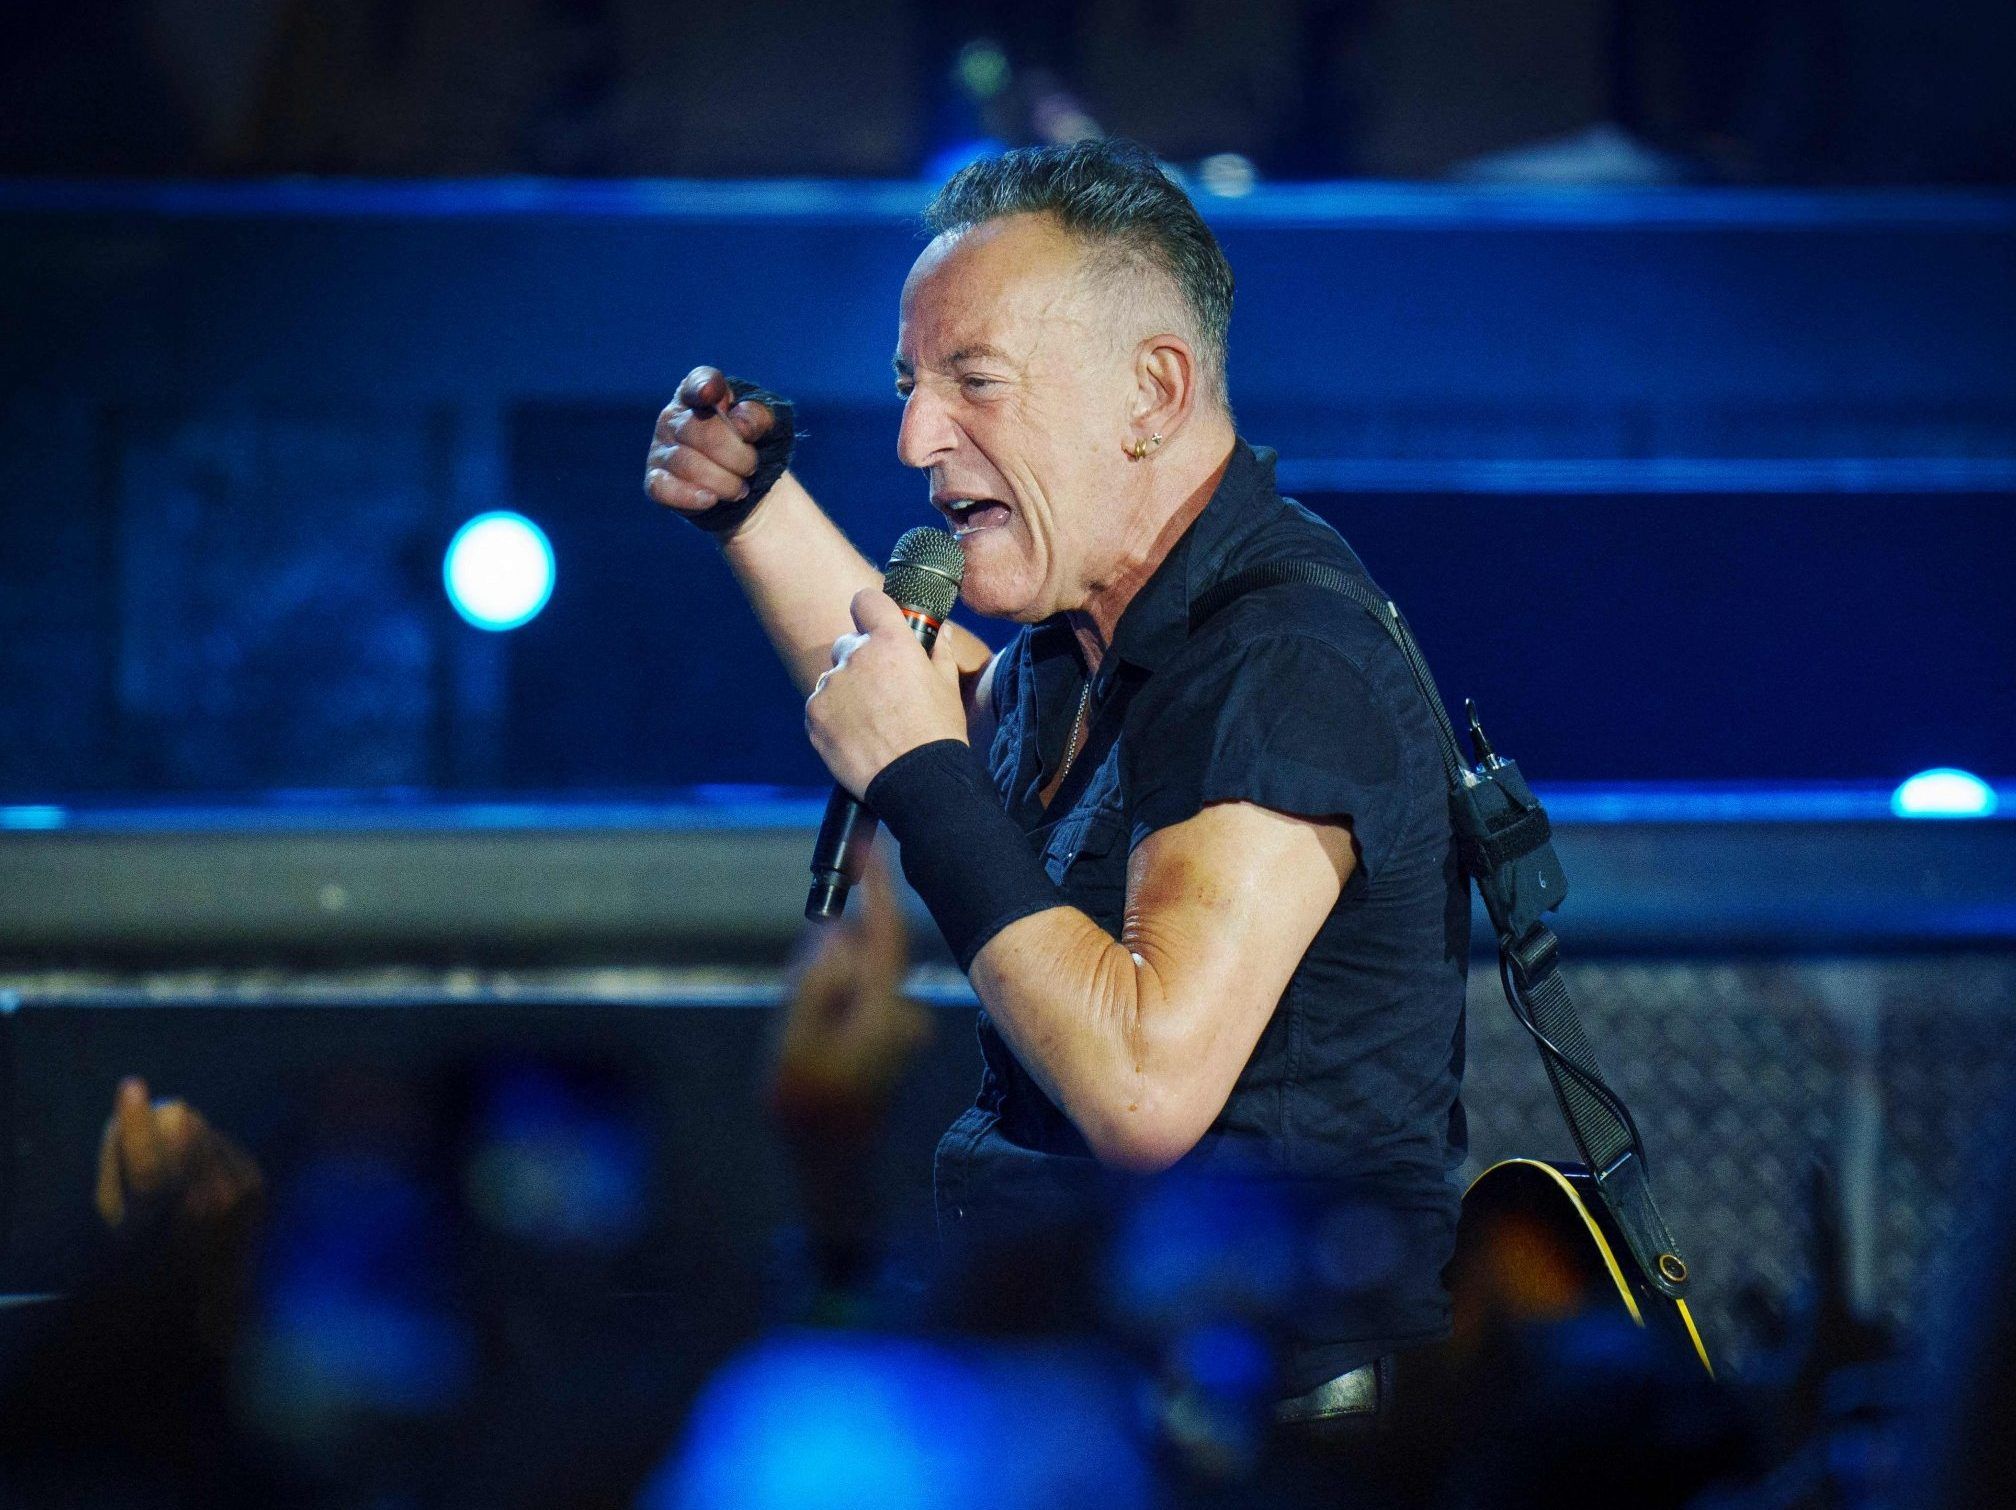 What to know about peptic ulcer disease after Bruce Springsteen news ...